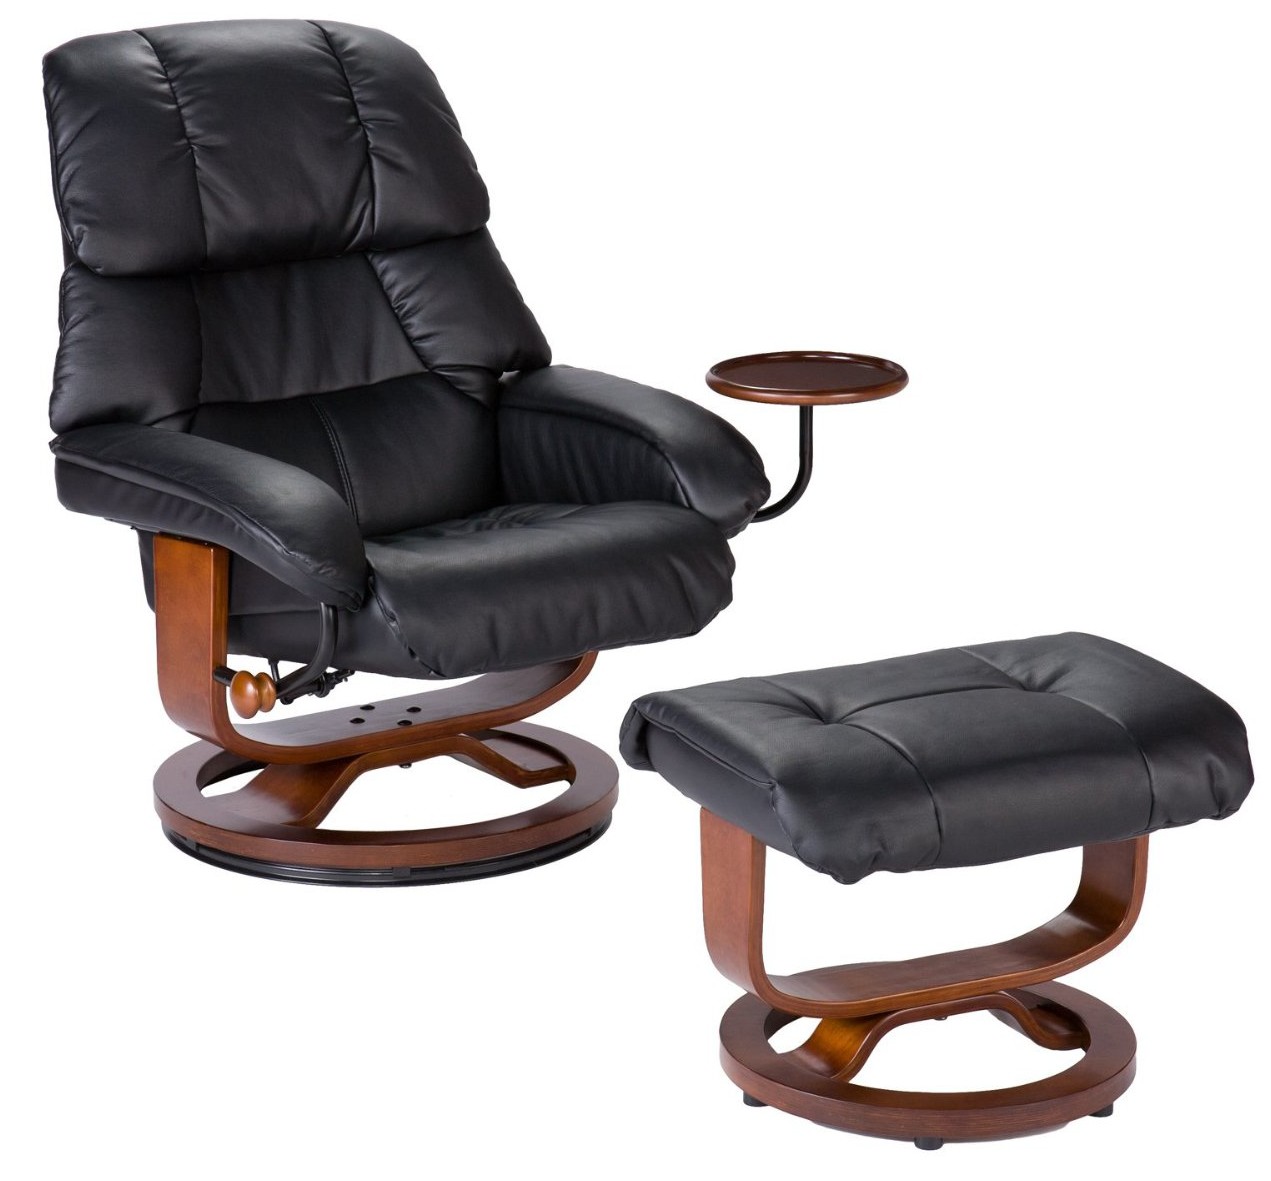 chair and a half recliner leather